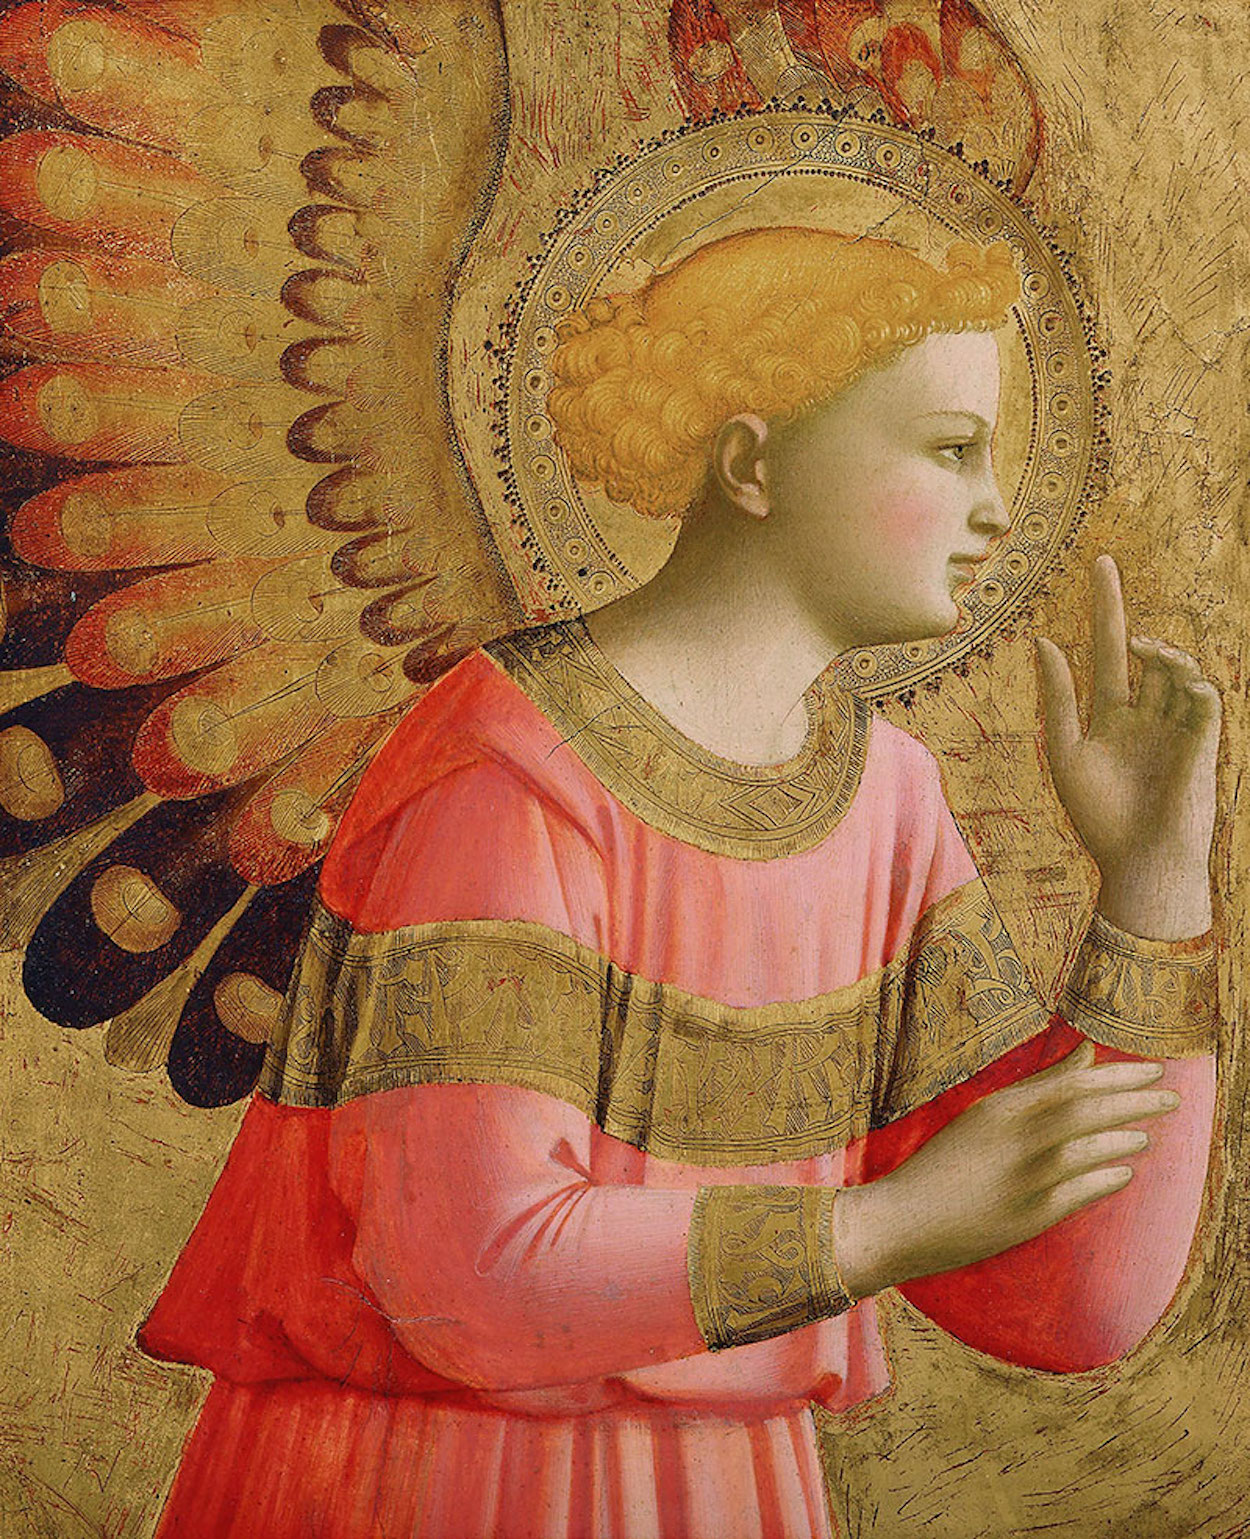 Annunciatory Angel by Fra Angelico - 1450-1455 - 10.63 x 13 in Detroit Institute of Arts